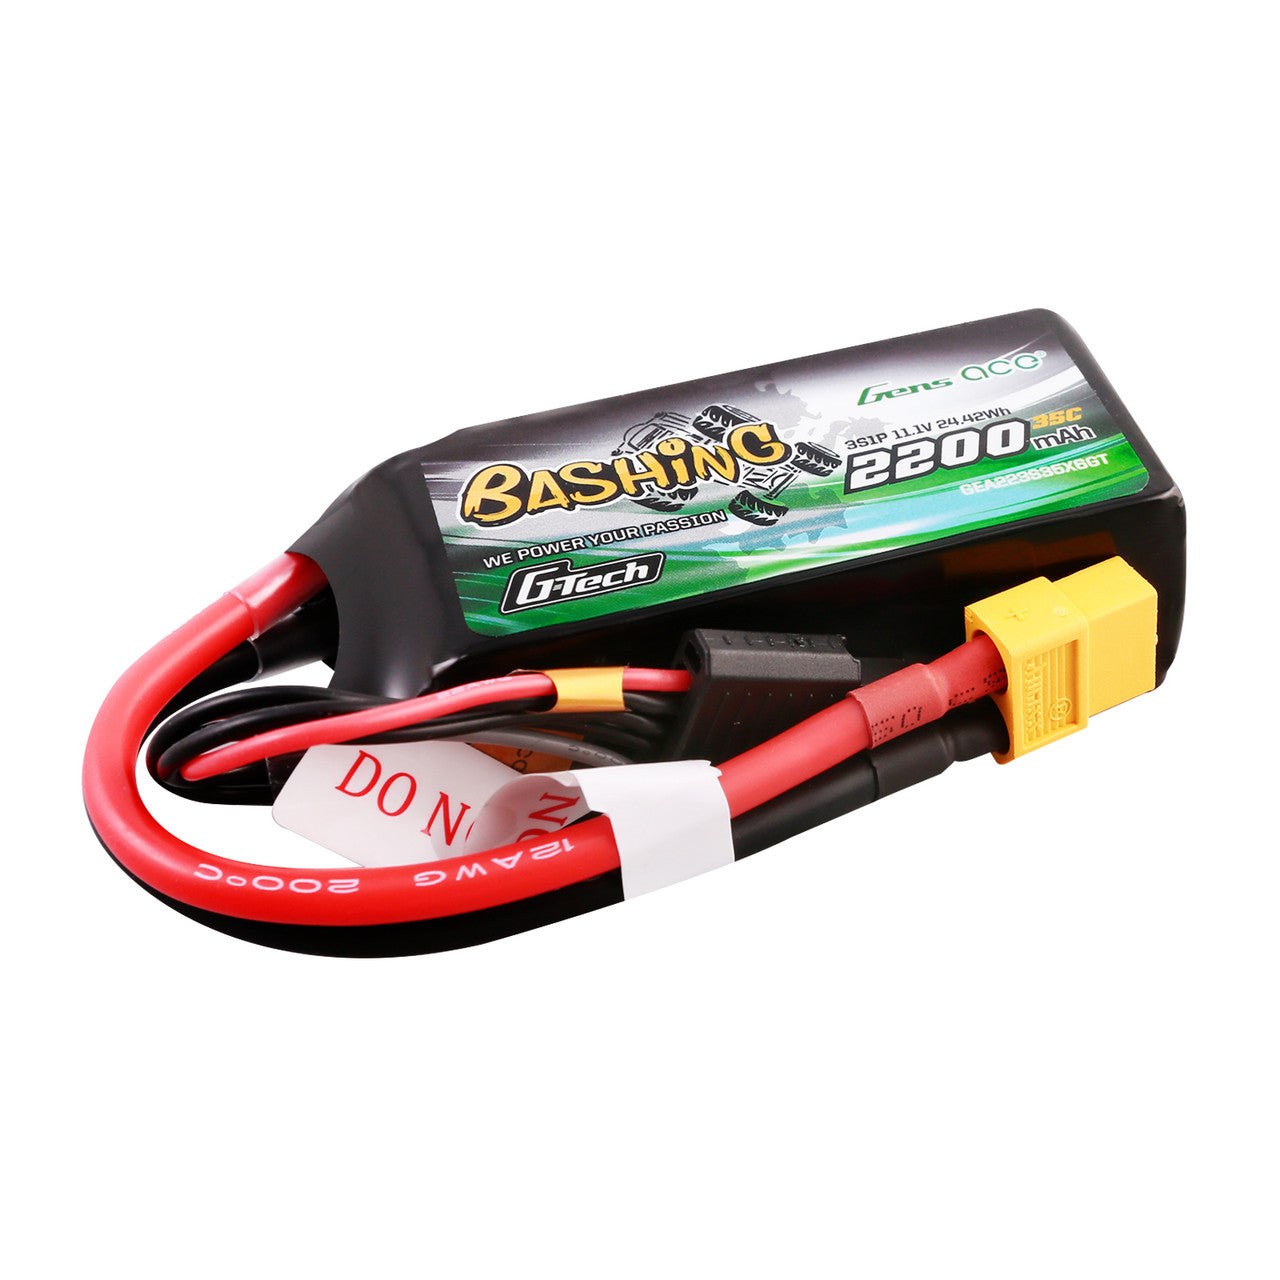 GEA223S35X6GT Gens Ace Bashing 11.1V 2200mAh 35C 3S1P G-Tech Lipo Battery Pack With XT60 Plug